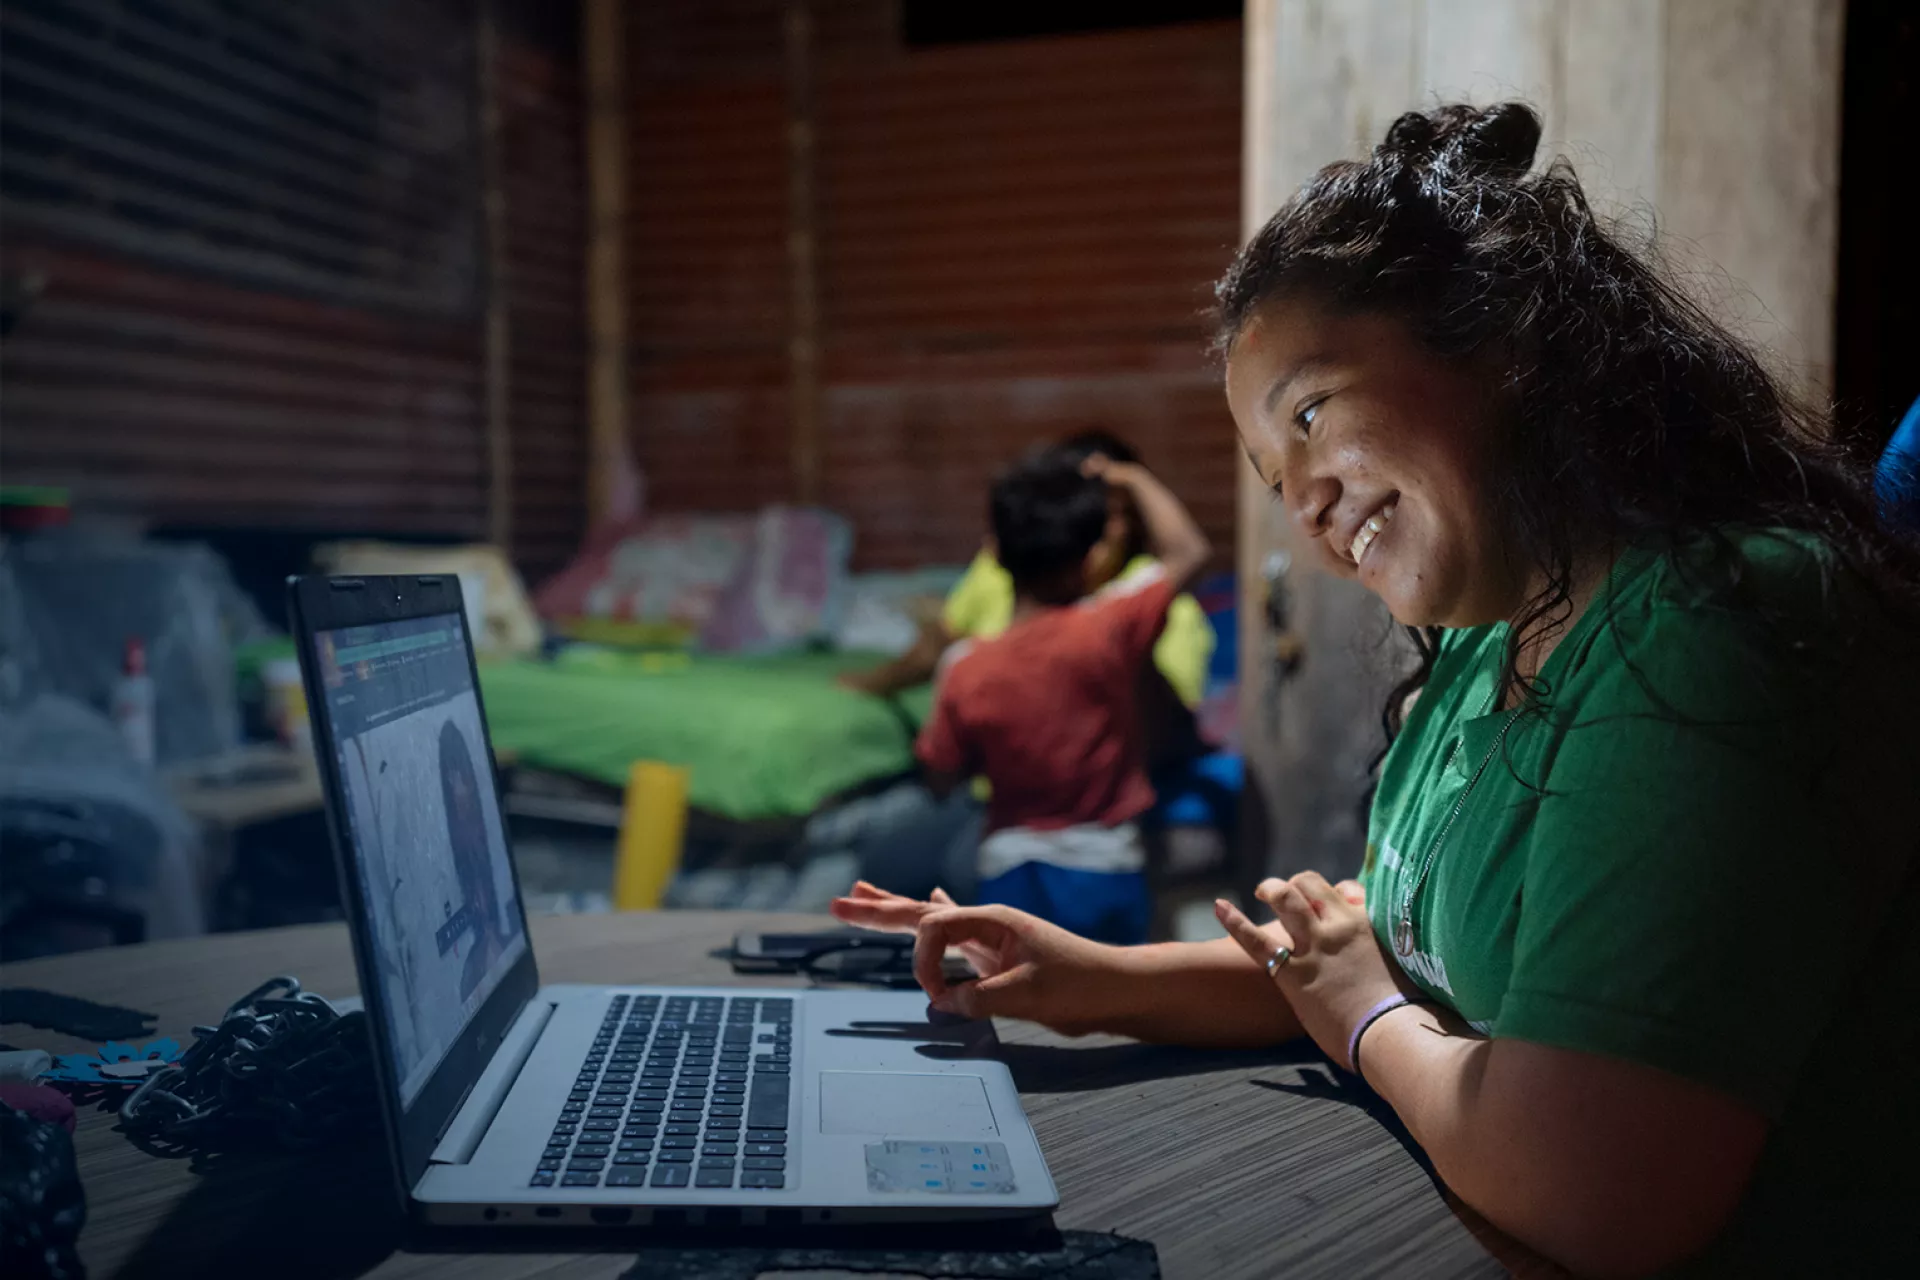 A young girl in front of a laptop